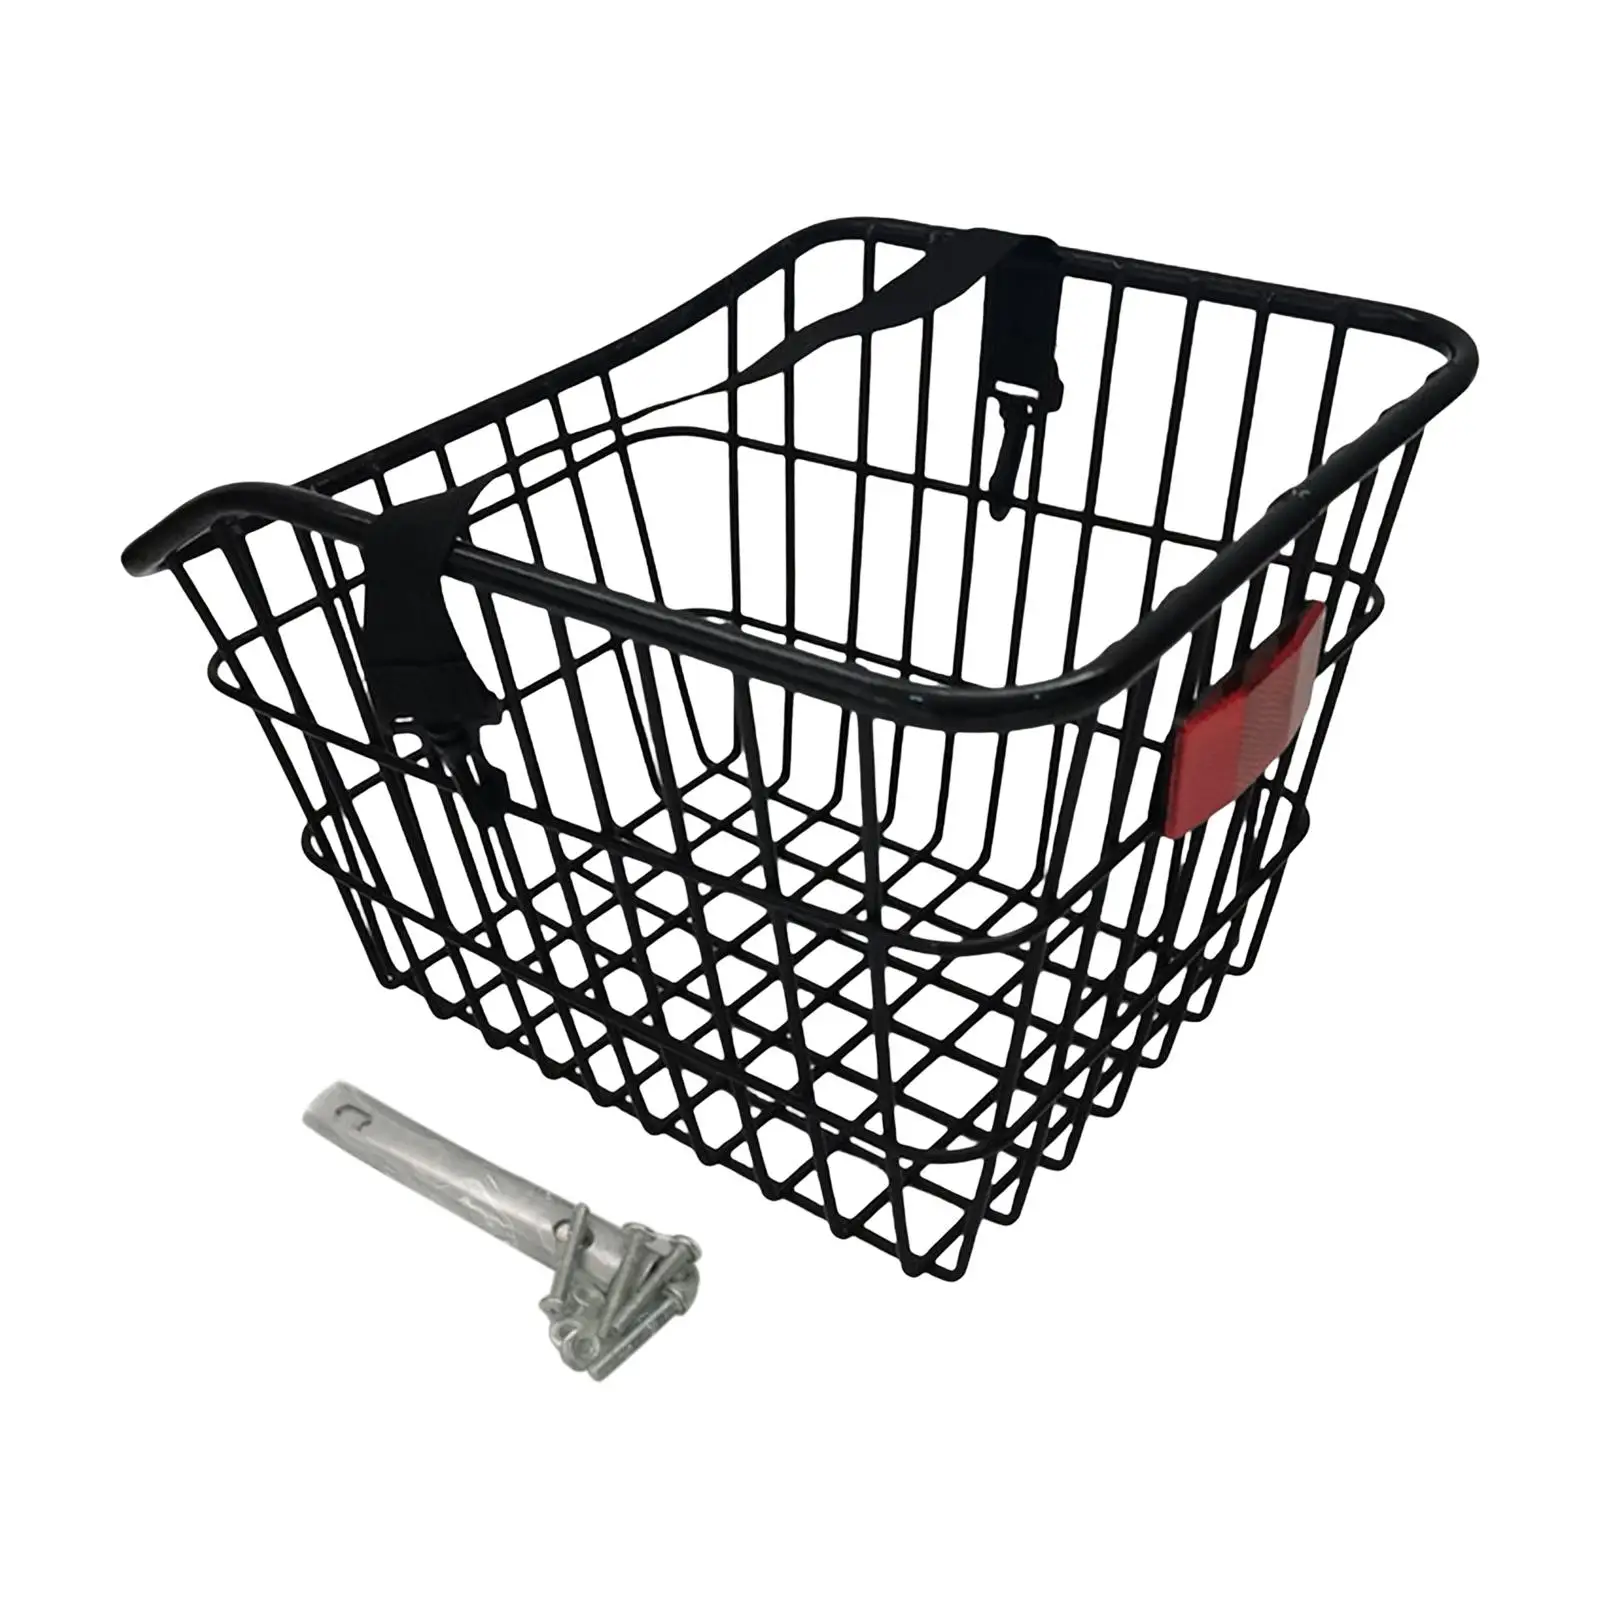 Bike Storage Basket with Bike Reflector Container Hanging Cycling Baskets for Waterproof